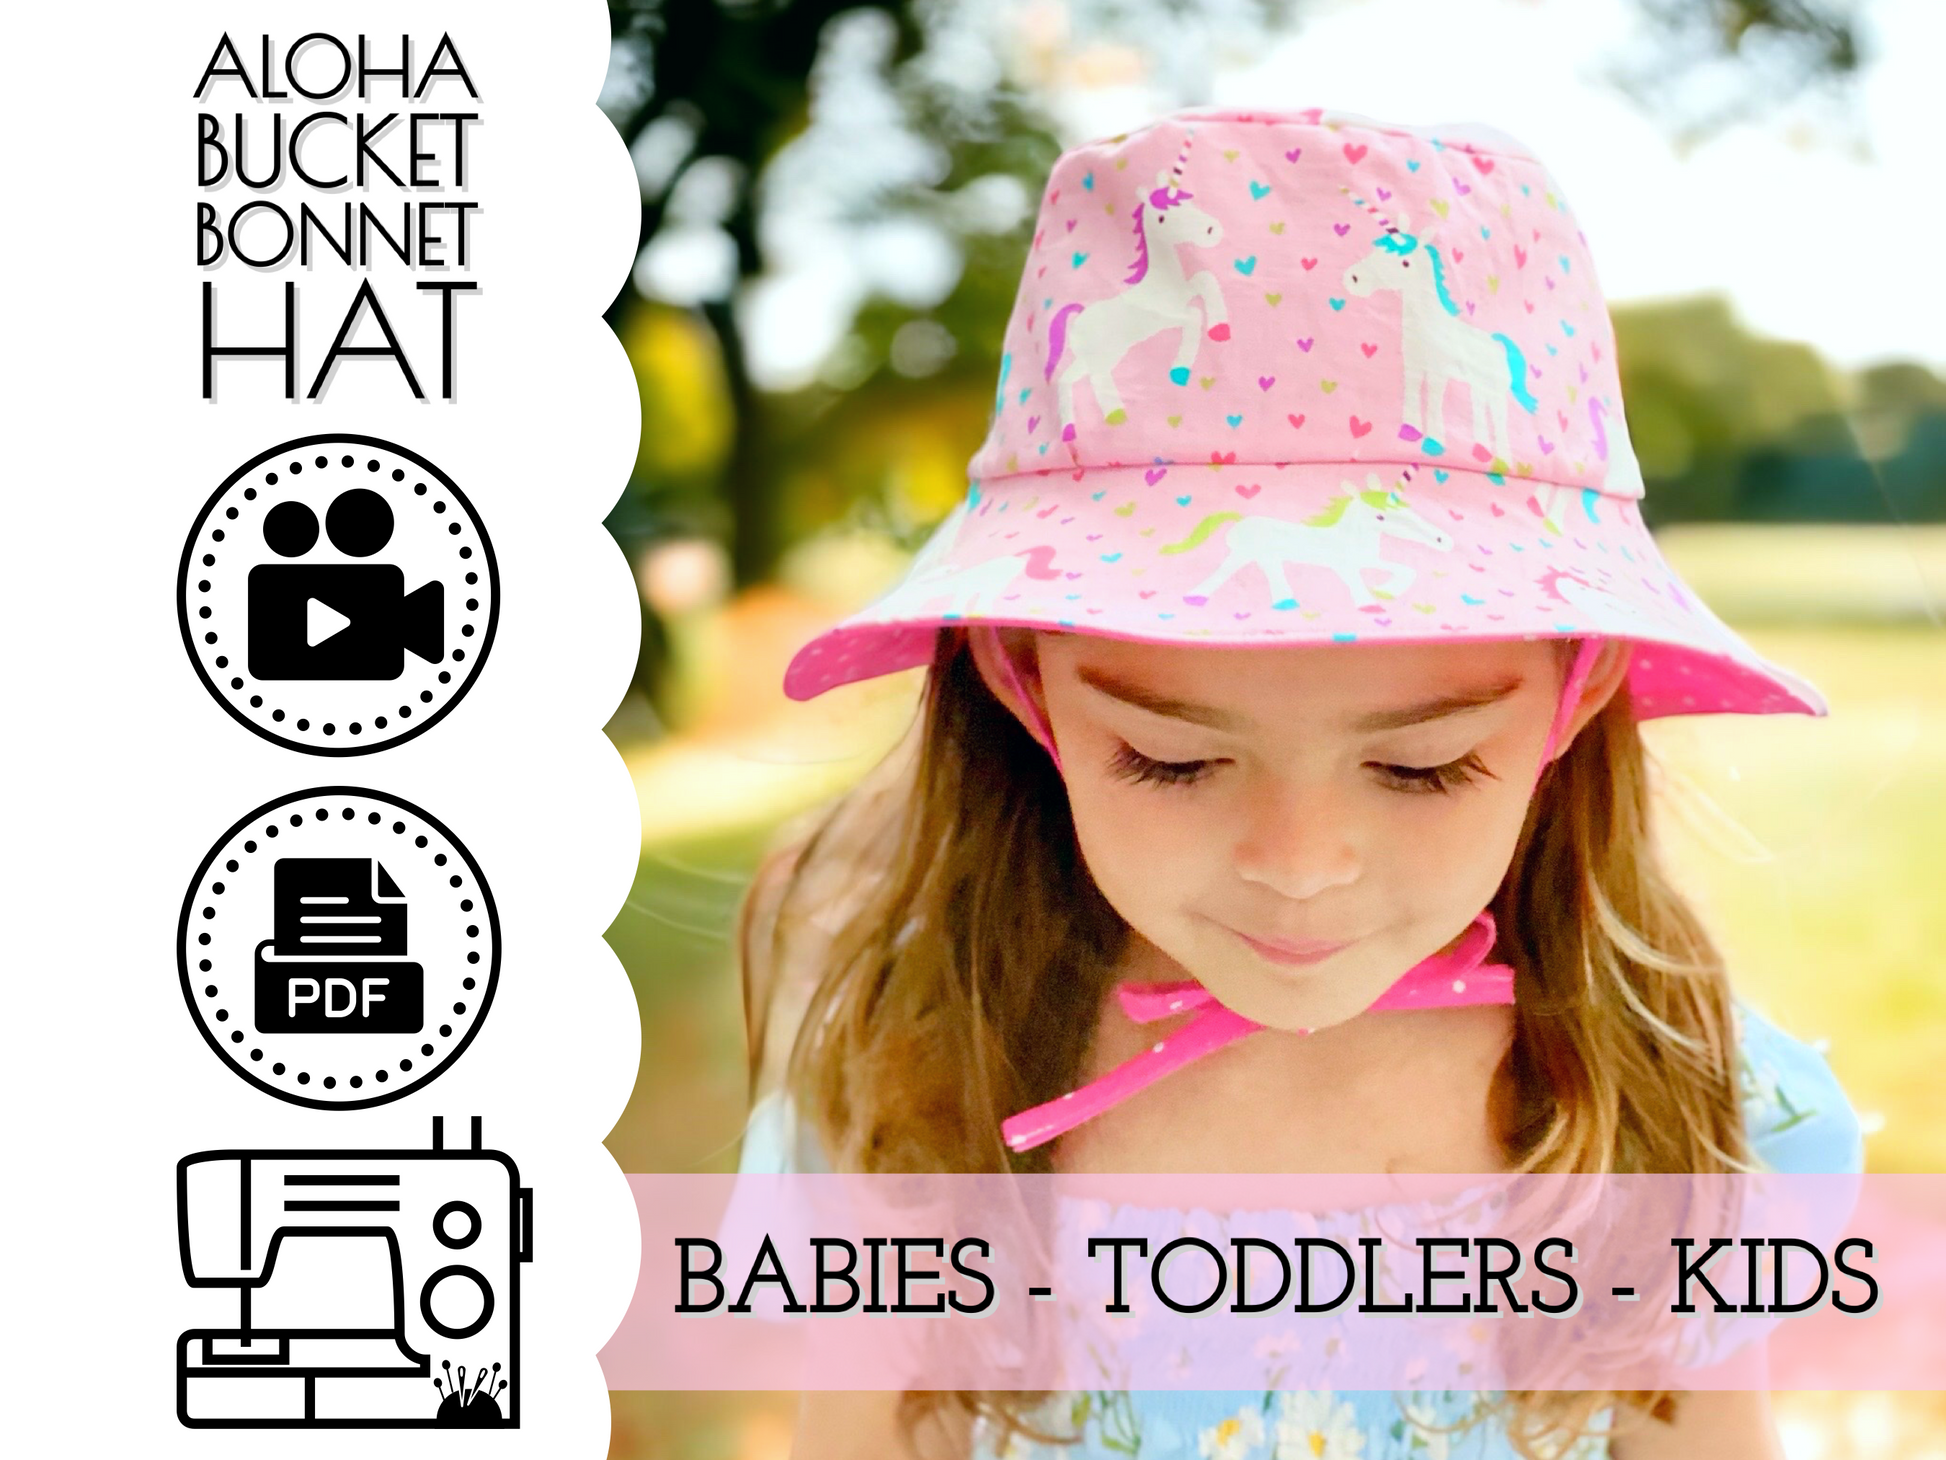 Easy bucket sun hat sewing pattern, diy babies bucket hat with straps, chin ties, toddler bucket hat, how to sew a bucket hat for girls or boys by aloha sewing company. Easy DIY sewing tutorial video and printable pattern.